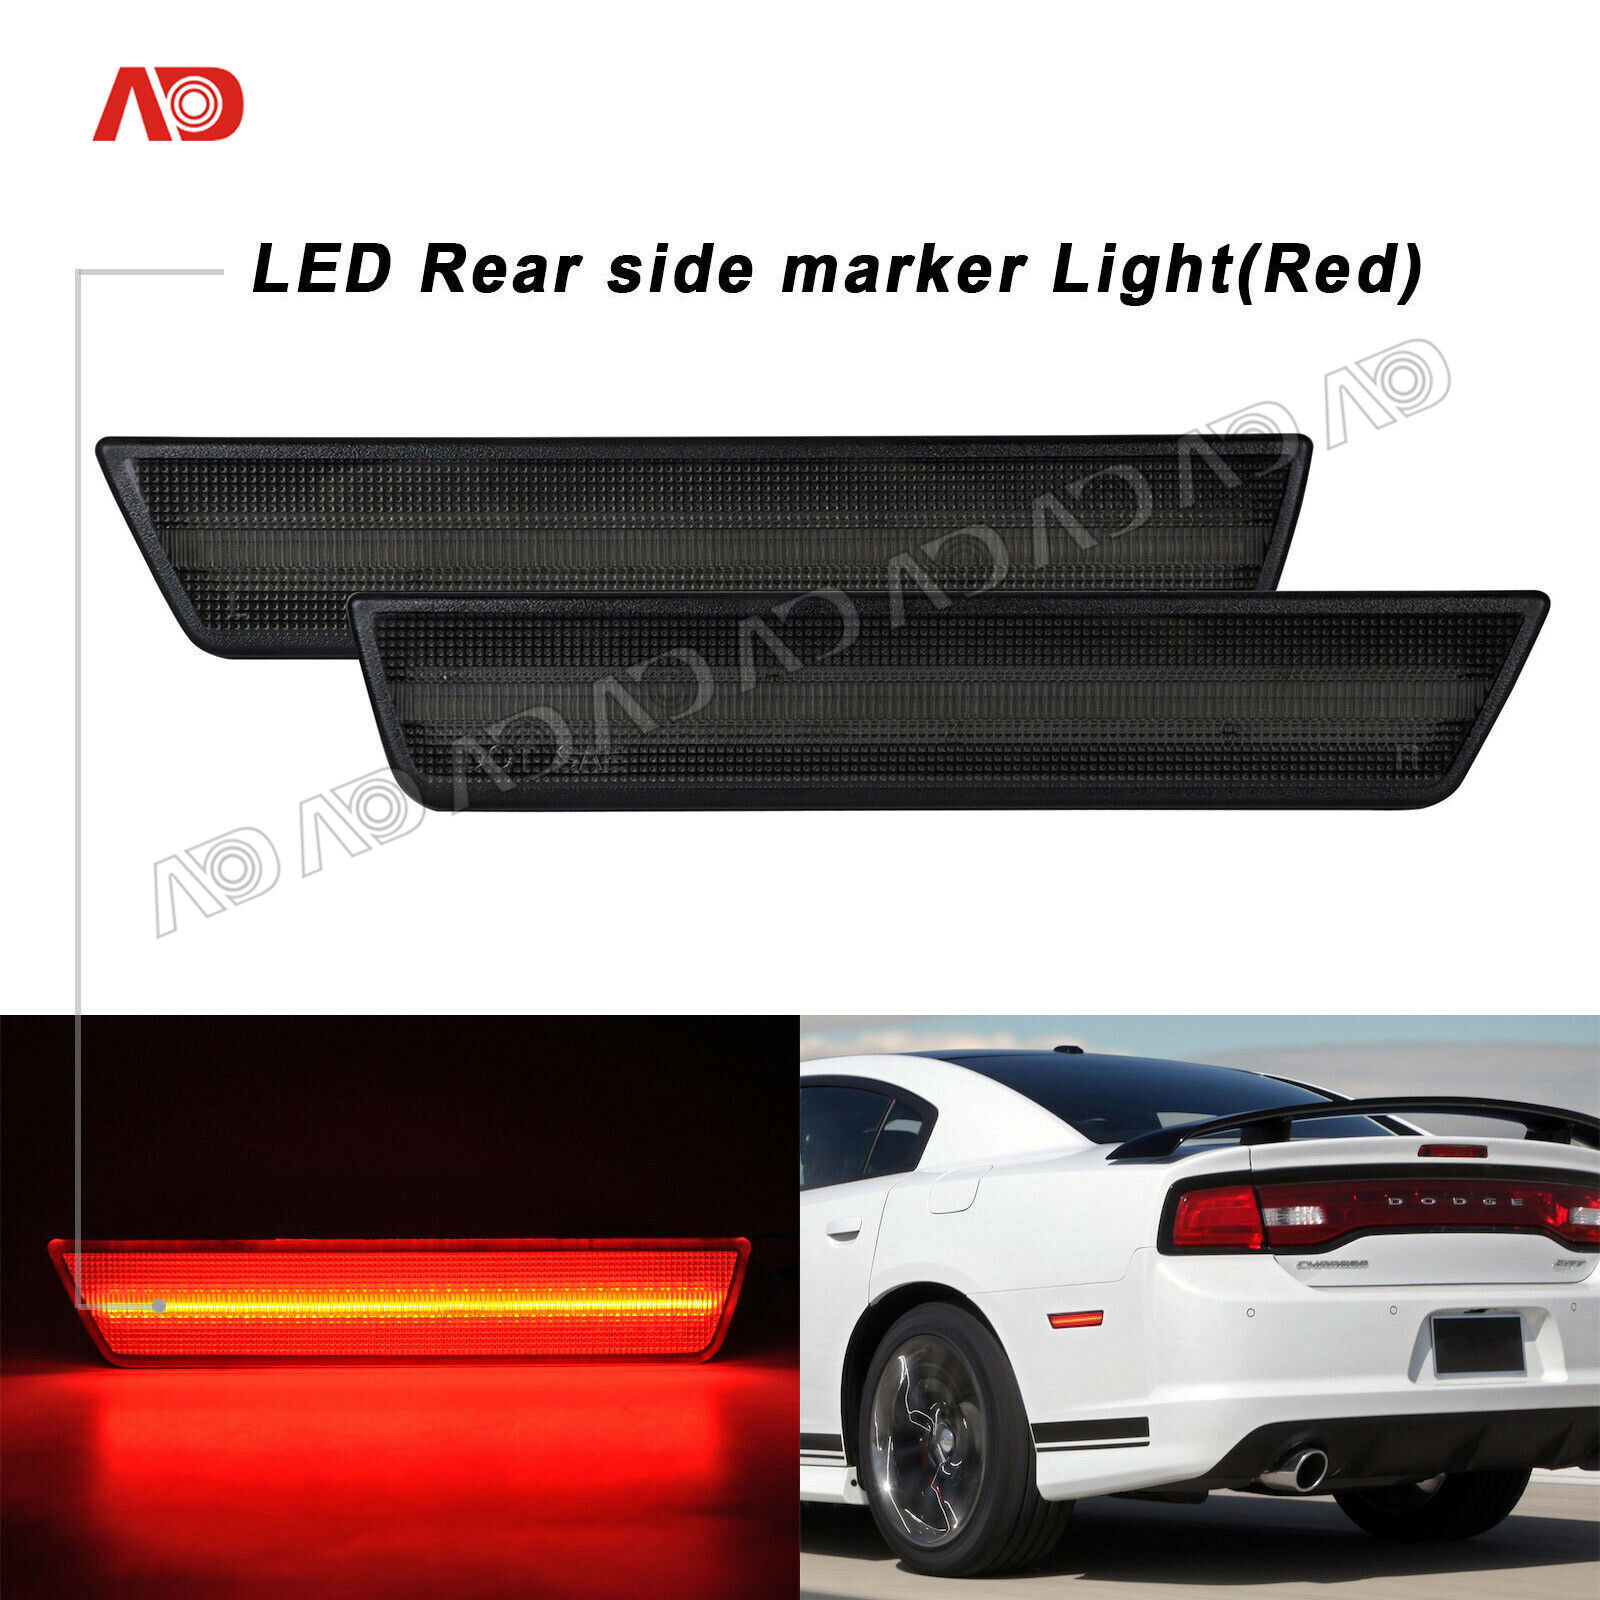 2xRear LED Side Marker Light Smoked Red For Dodge Charger 11-14 Challenger 08-14